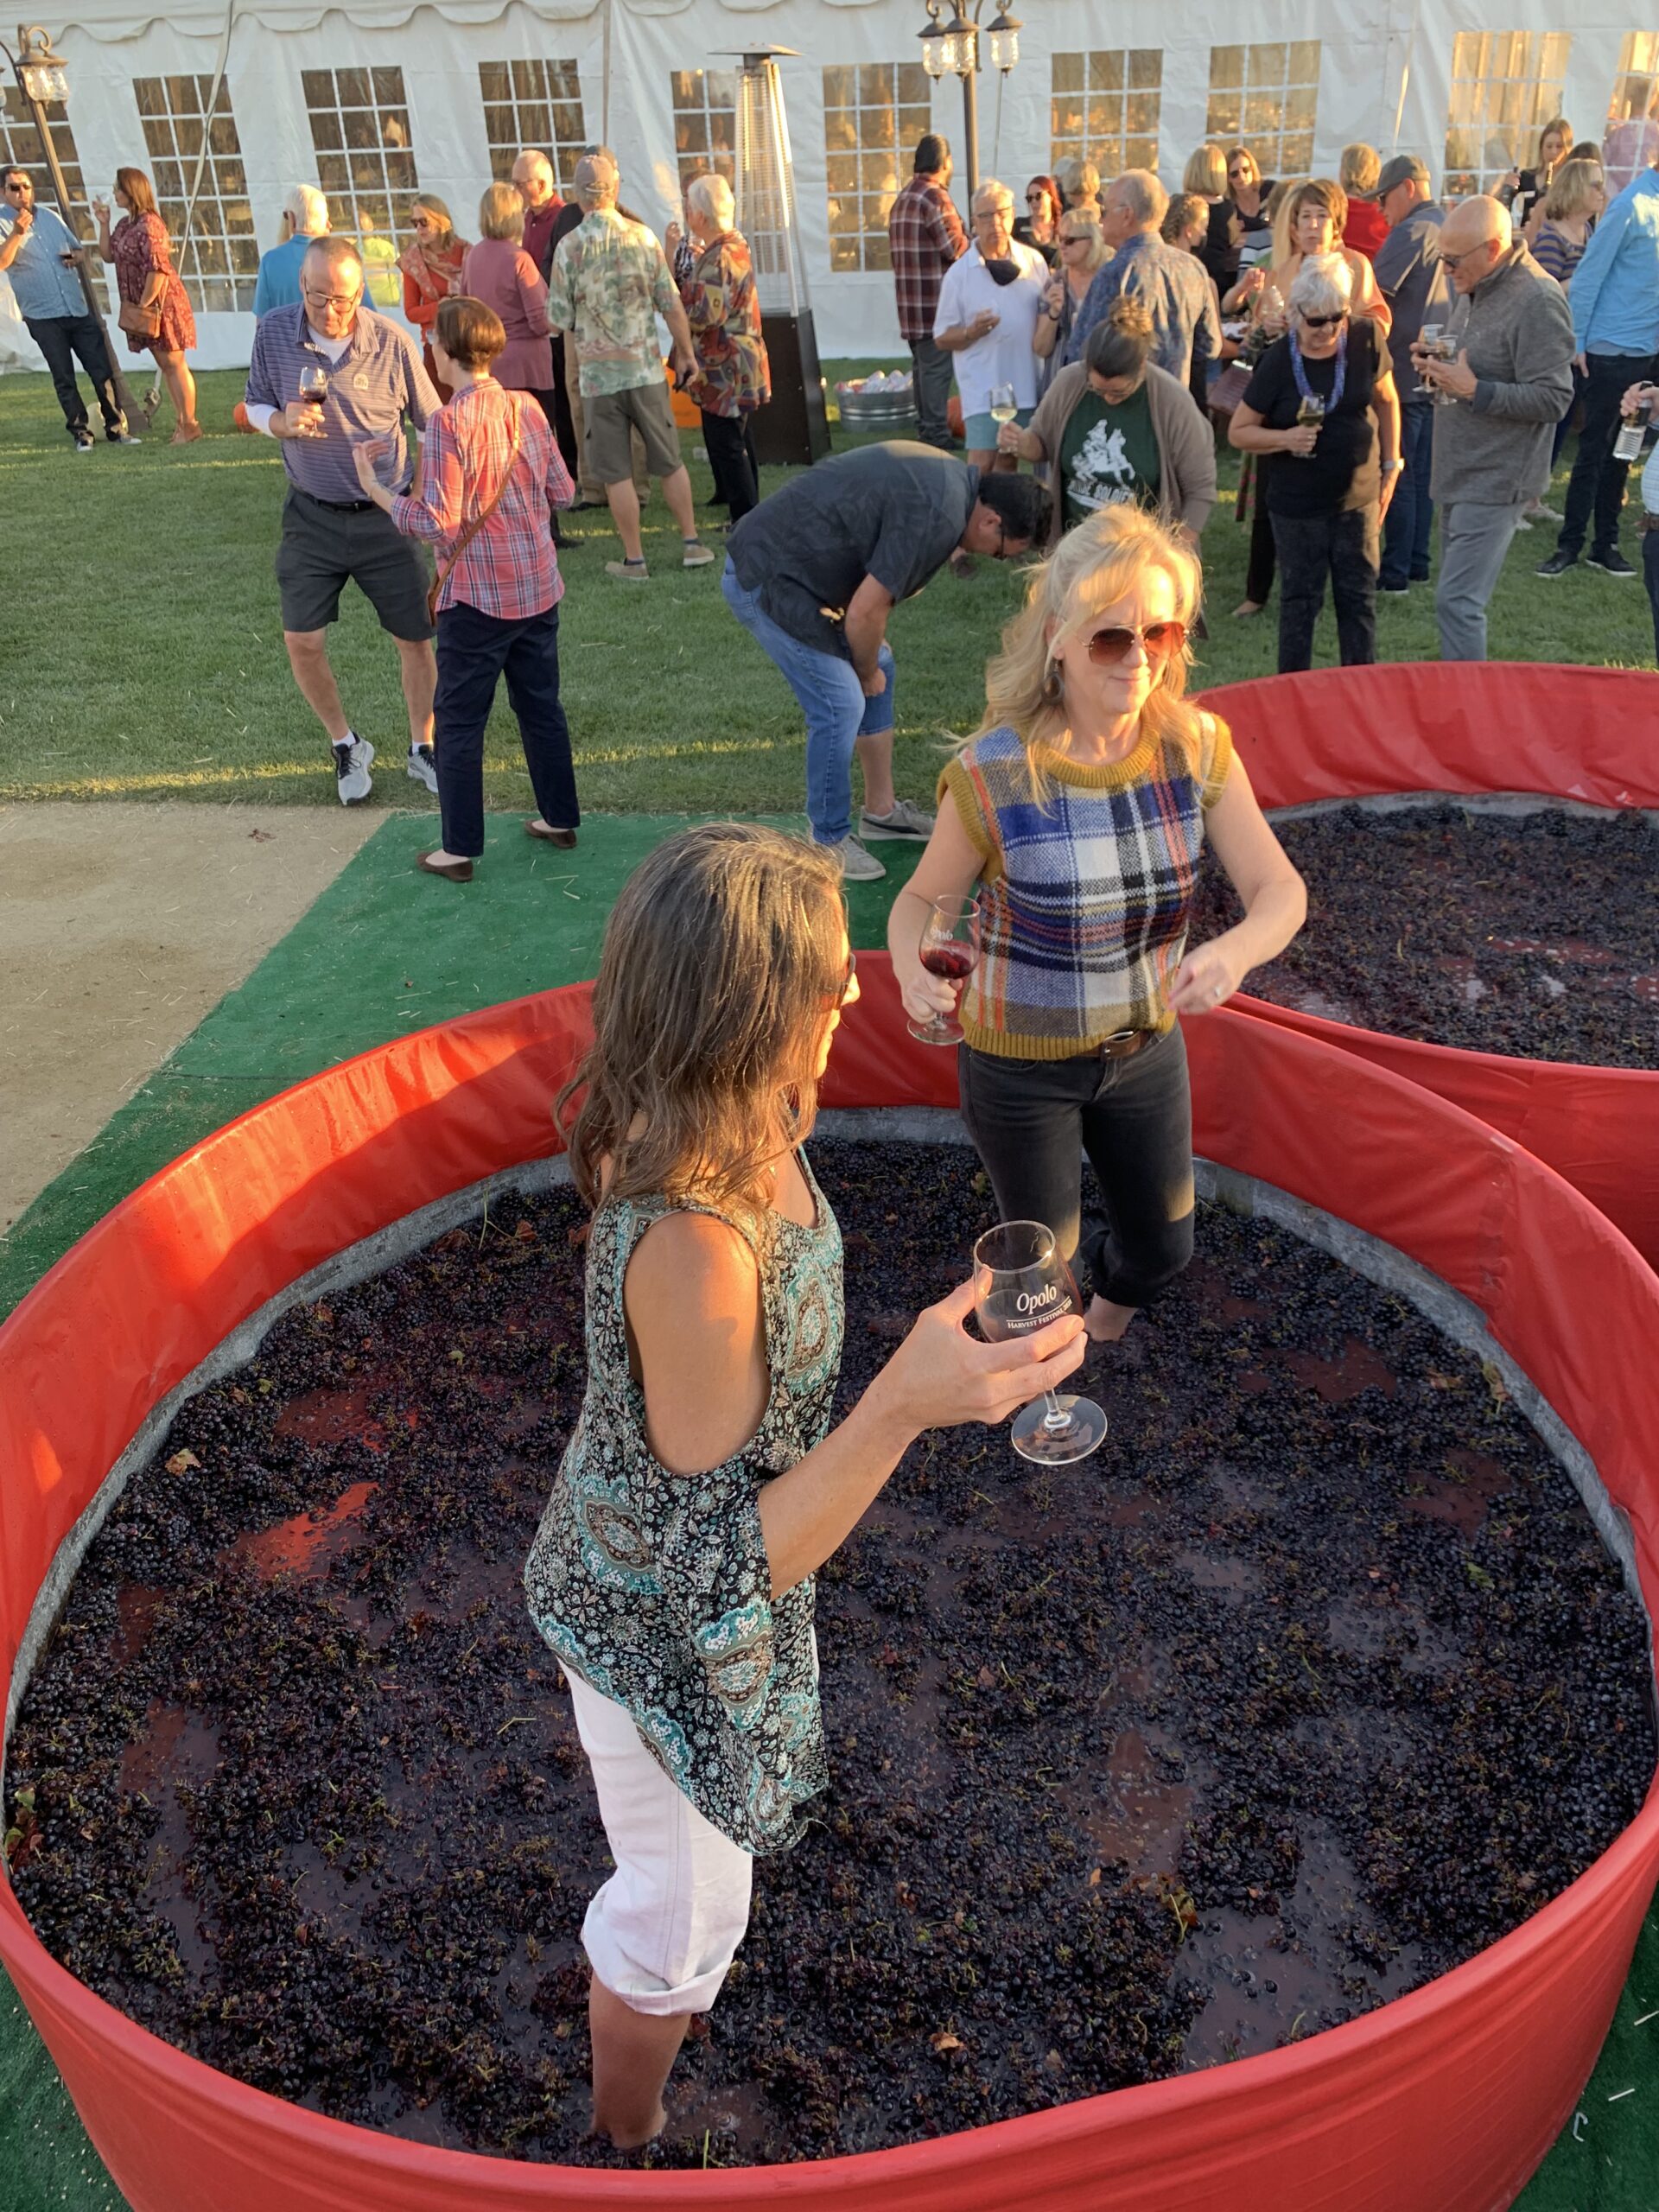 Two women stomping grapes with glasses of wine